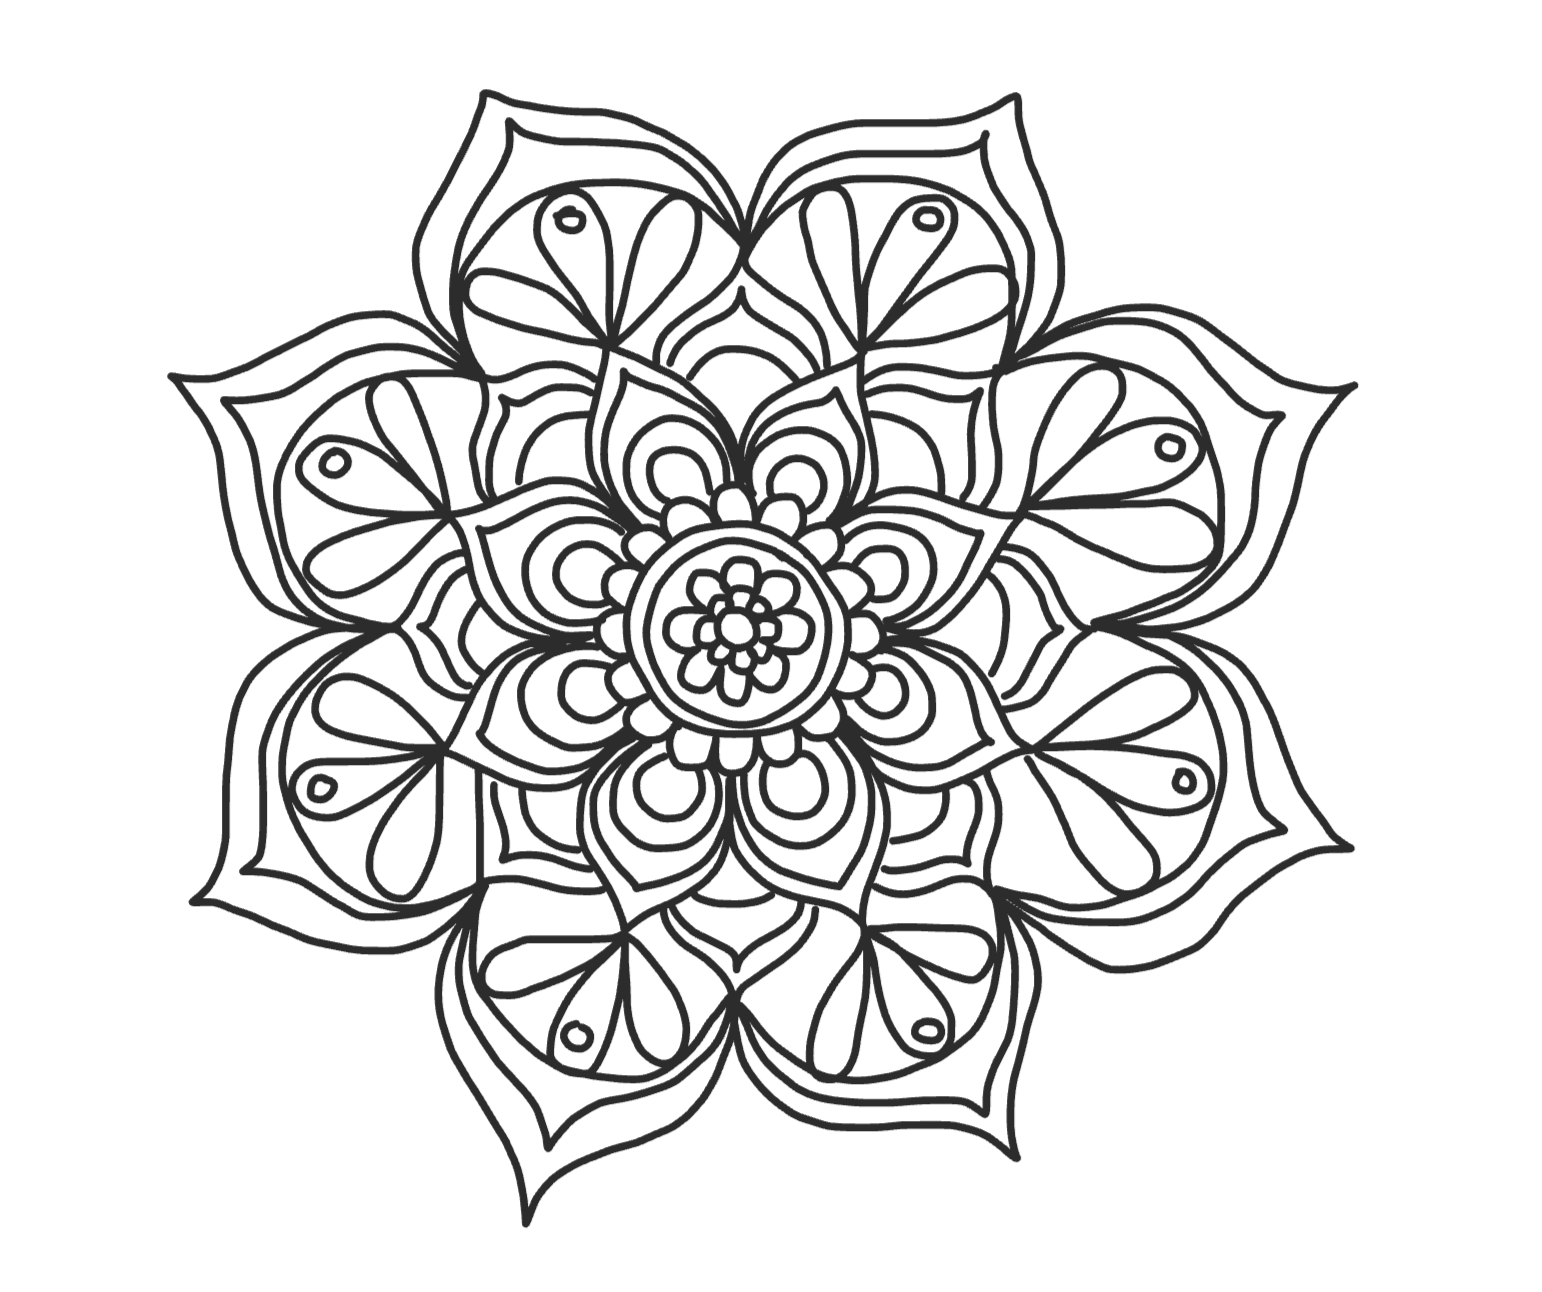 Simple Repeating Flower Pattern Mandala to Color